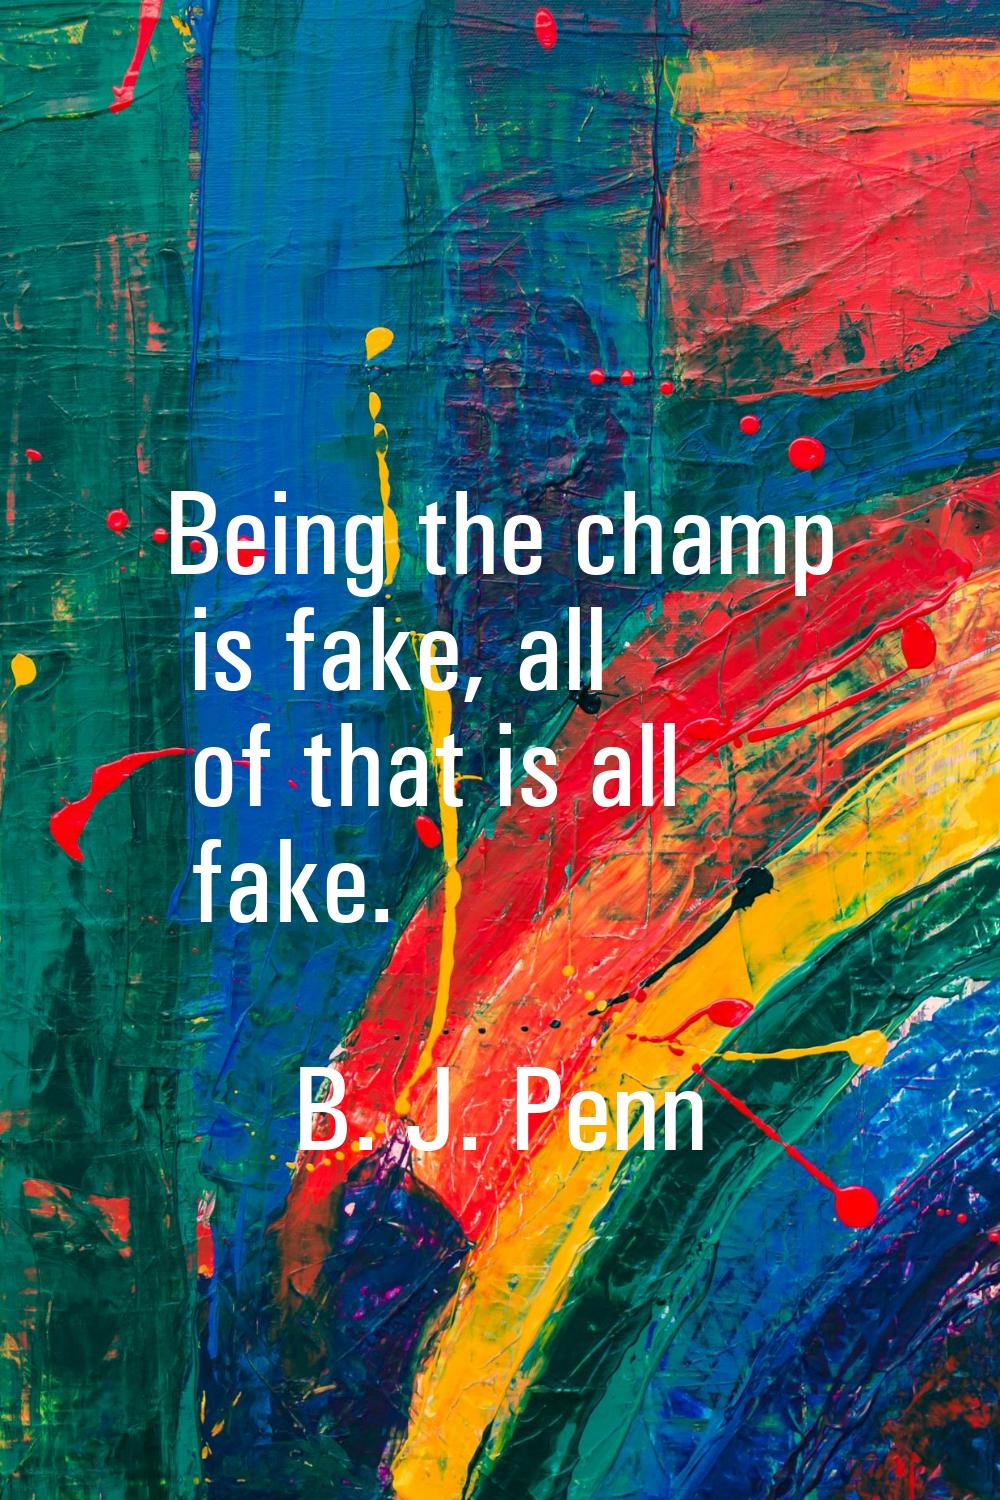 Being the champ is fake, all of that is all fake.